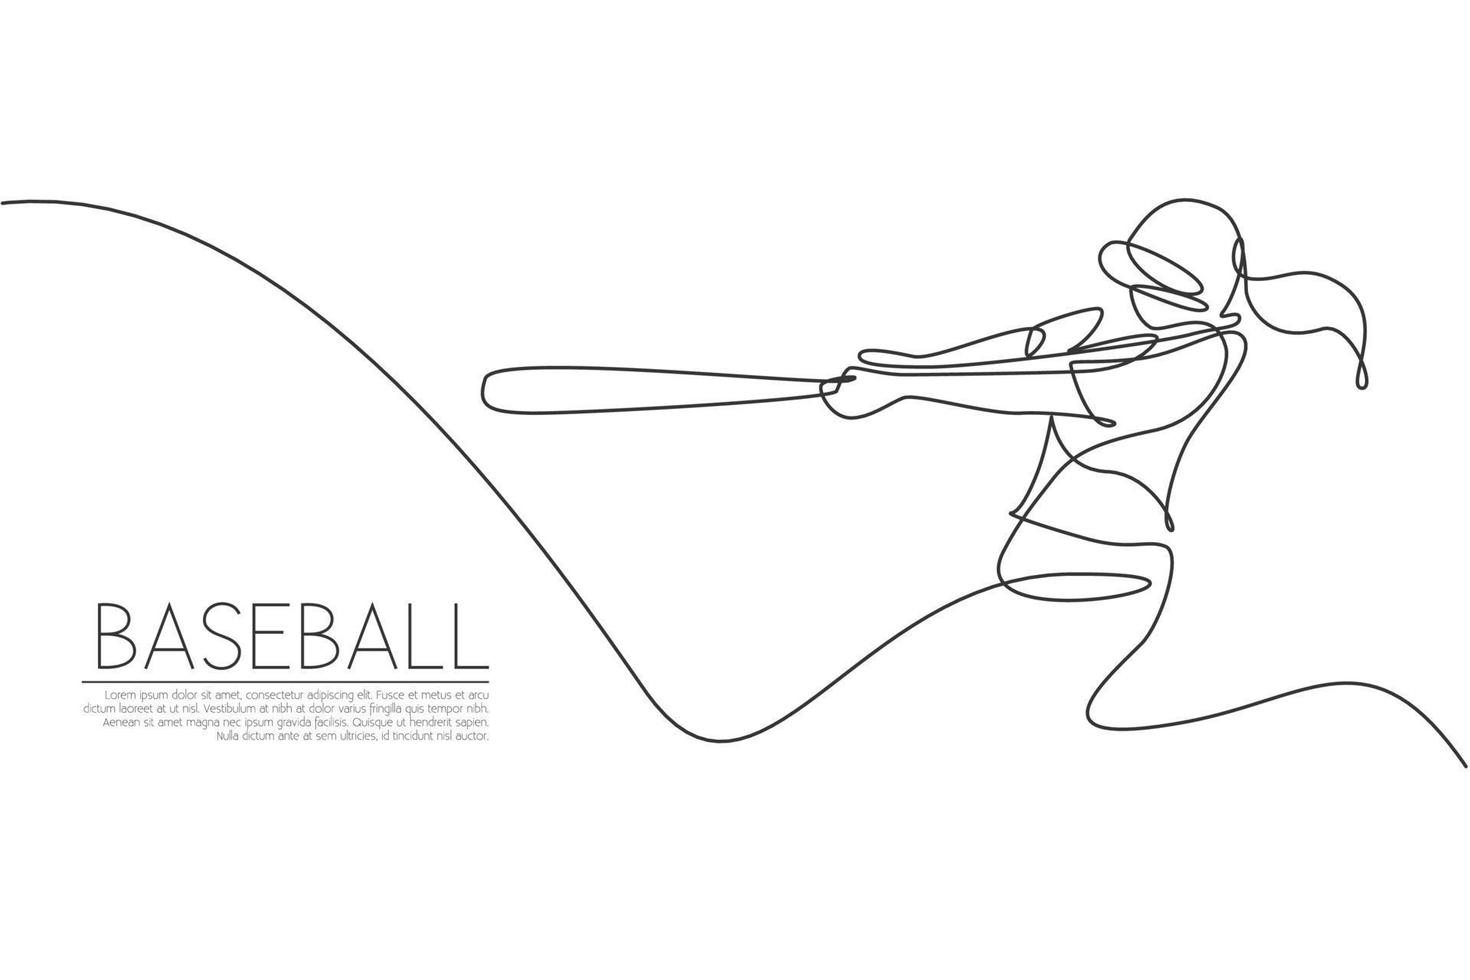 Single continuous line drawing of young agile woman baseball player hit the ball seriously. Sport exercise concept. Trendy one line draw design vector graphic illustration for baseball promotion media